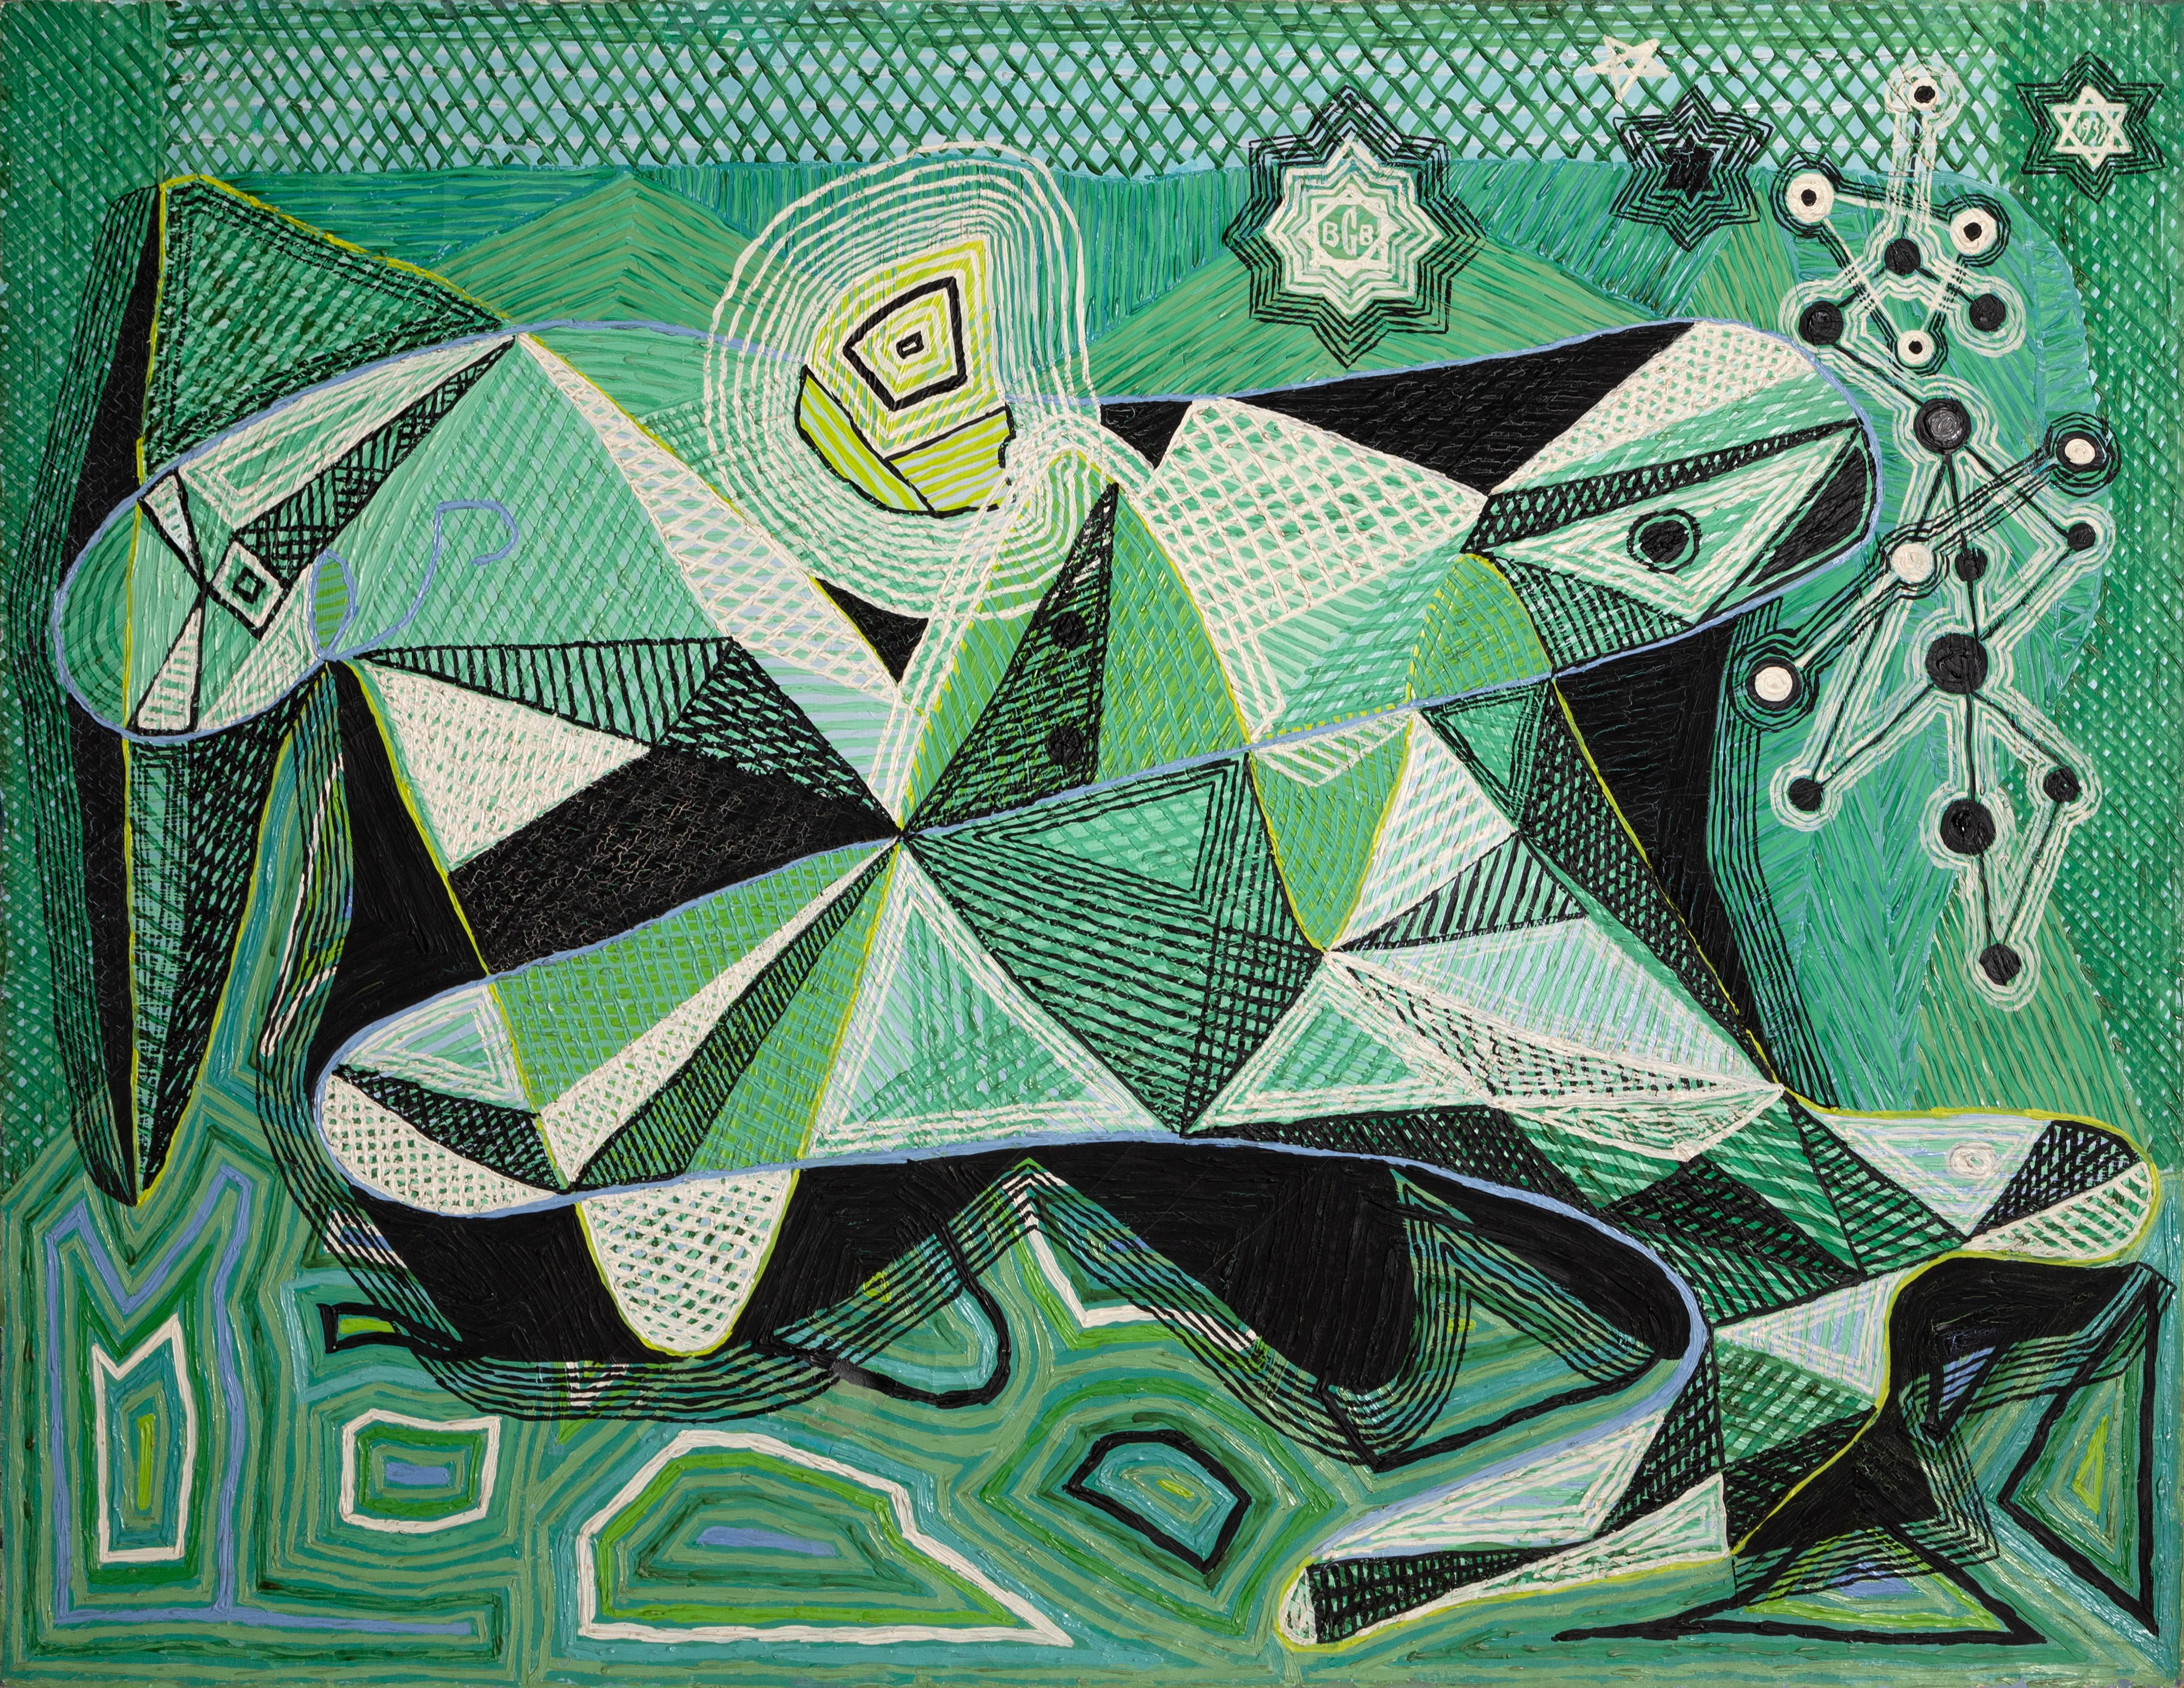 An Evocation on Man and Nature, Abstract Cubist Painting by Benjamin Benno 1939